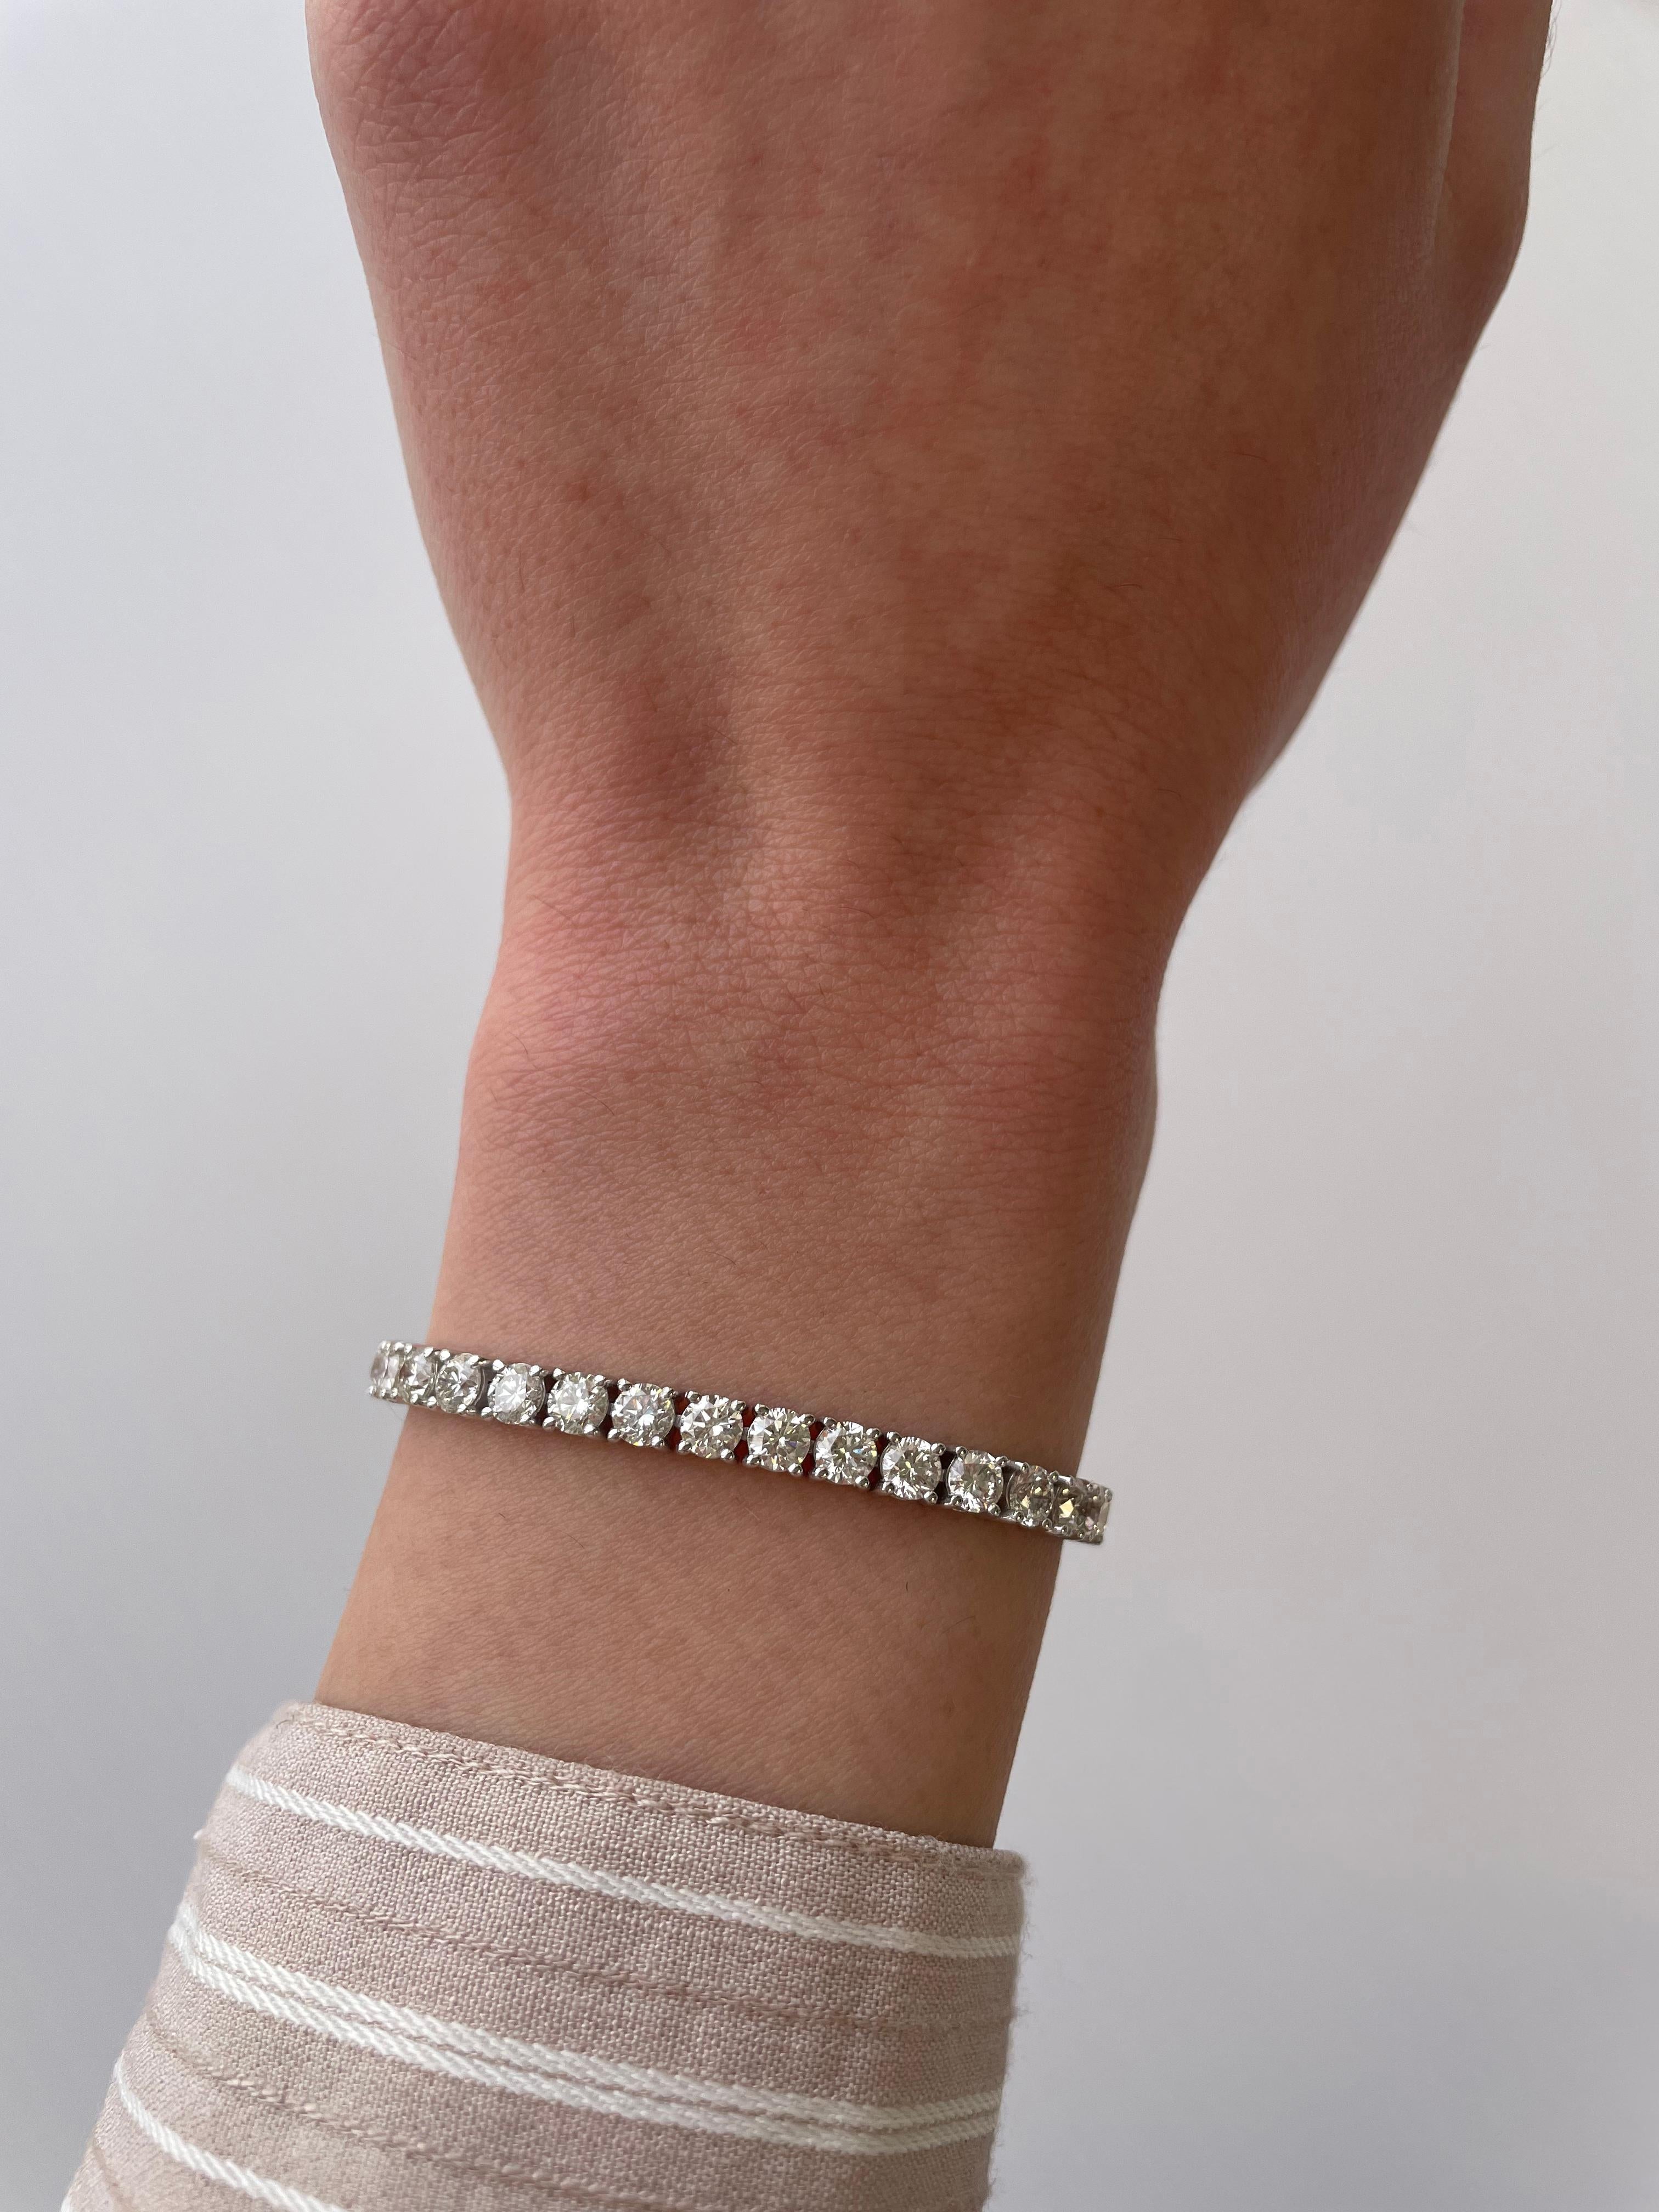 Exquisite and timeless diamonds tennis bracelet, by Alexander Beverly Hills.
42 round brilliant diamonds, 9.88 carats. Approximately G/H color and VS clarity. Four prong set in 18k white gold, 12.07 grams, 7 inches. 
Accommodated with an up-to-date